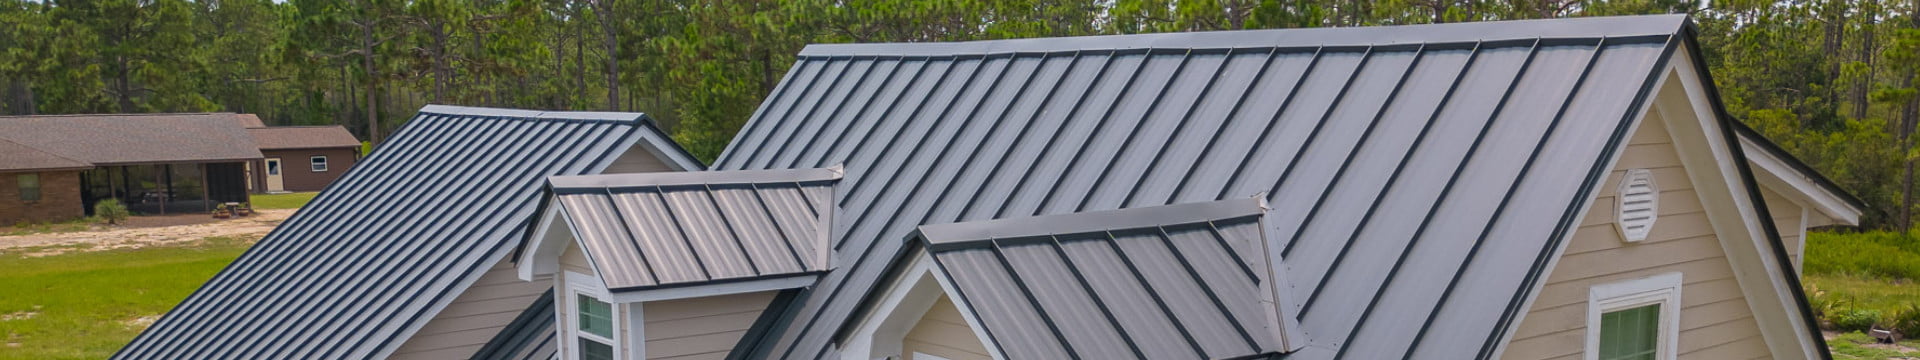 Contact Hall Roofing Company for all your roofing needs in North Florida